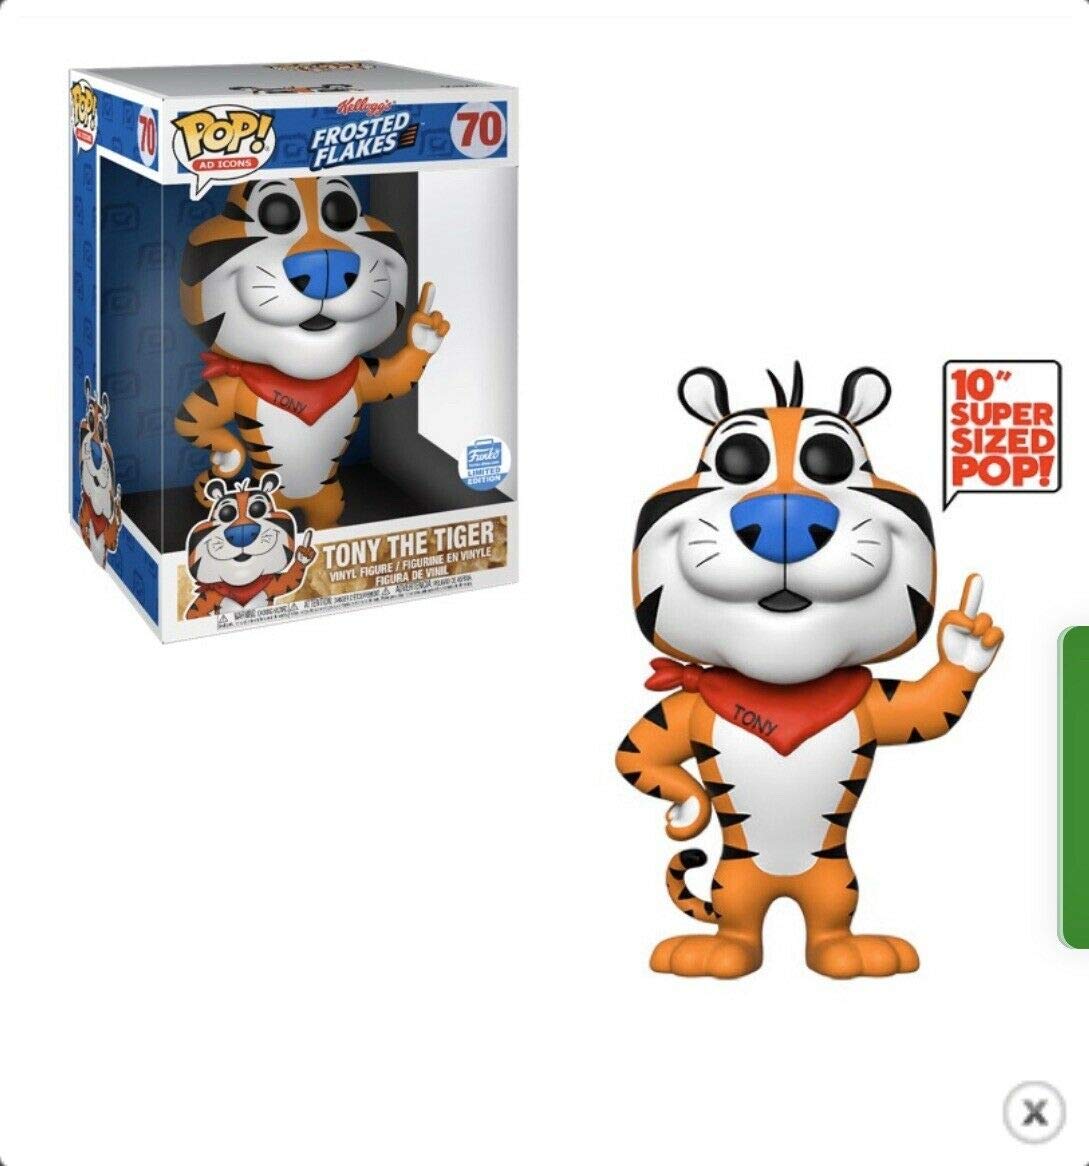 Funko POP! AD Icons Frosted Flakes Tony The Tiger 10 Inch